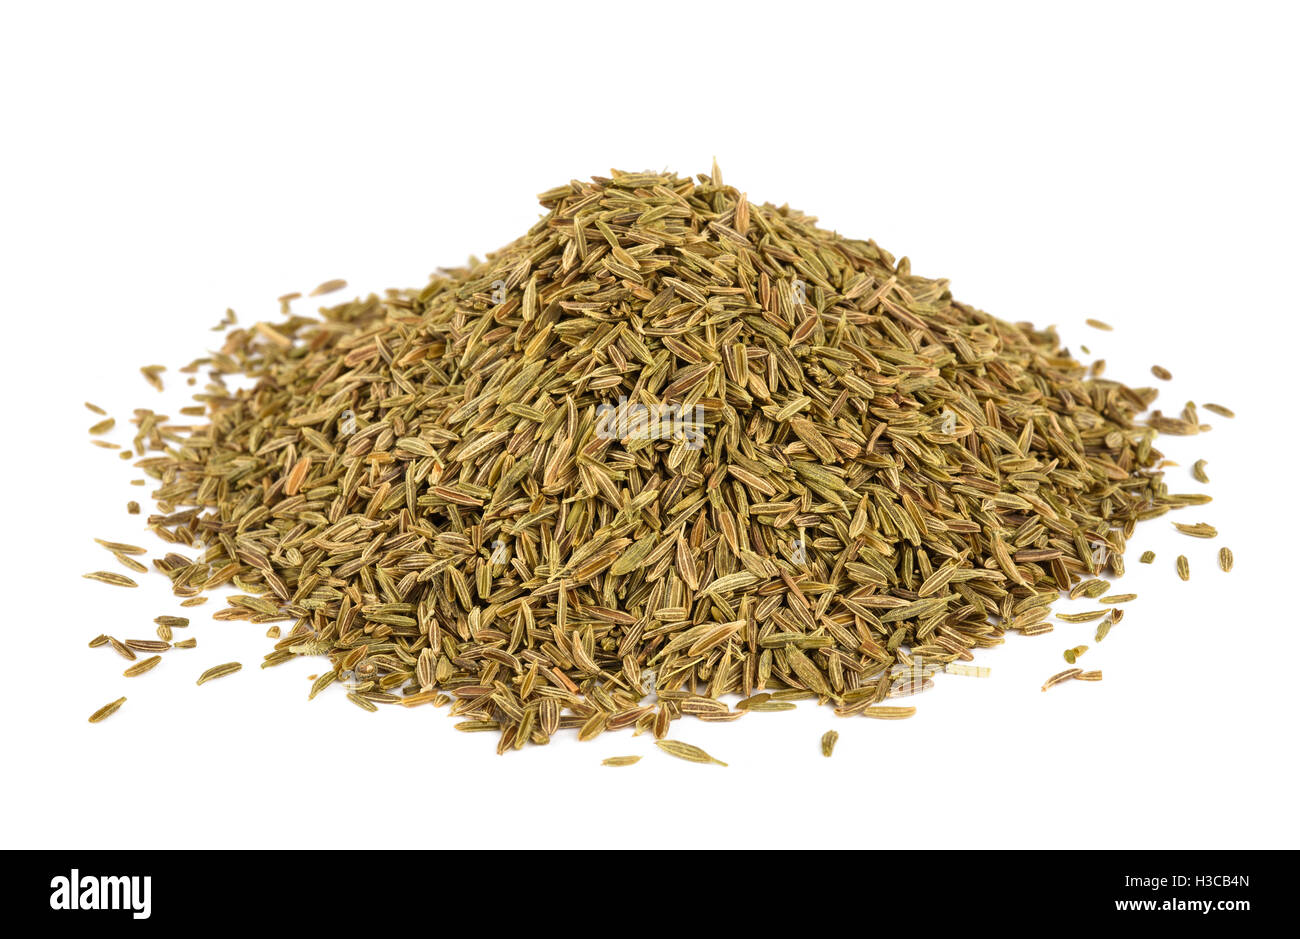 Cumin seeds (caraway) pile isolated on white Stock Photo